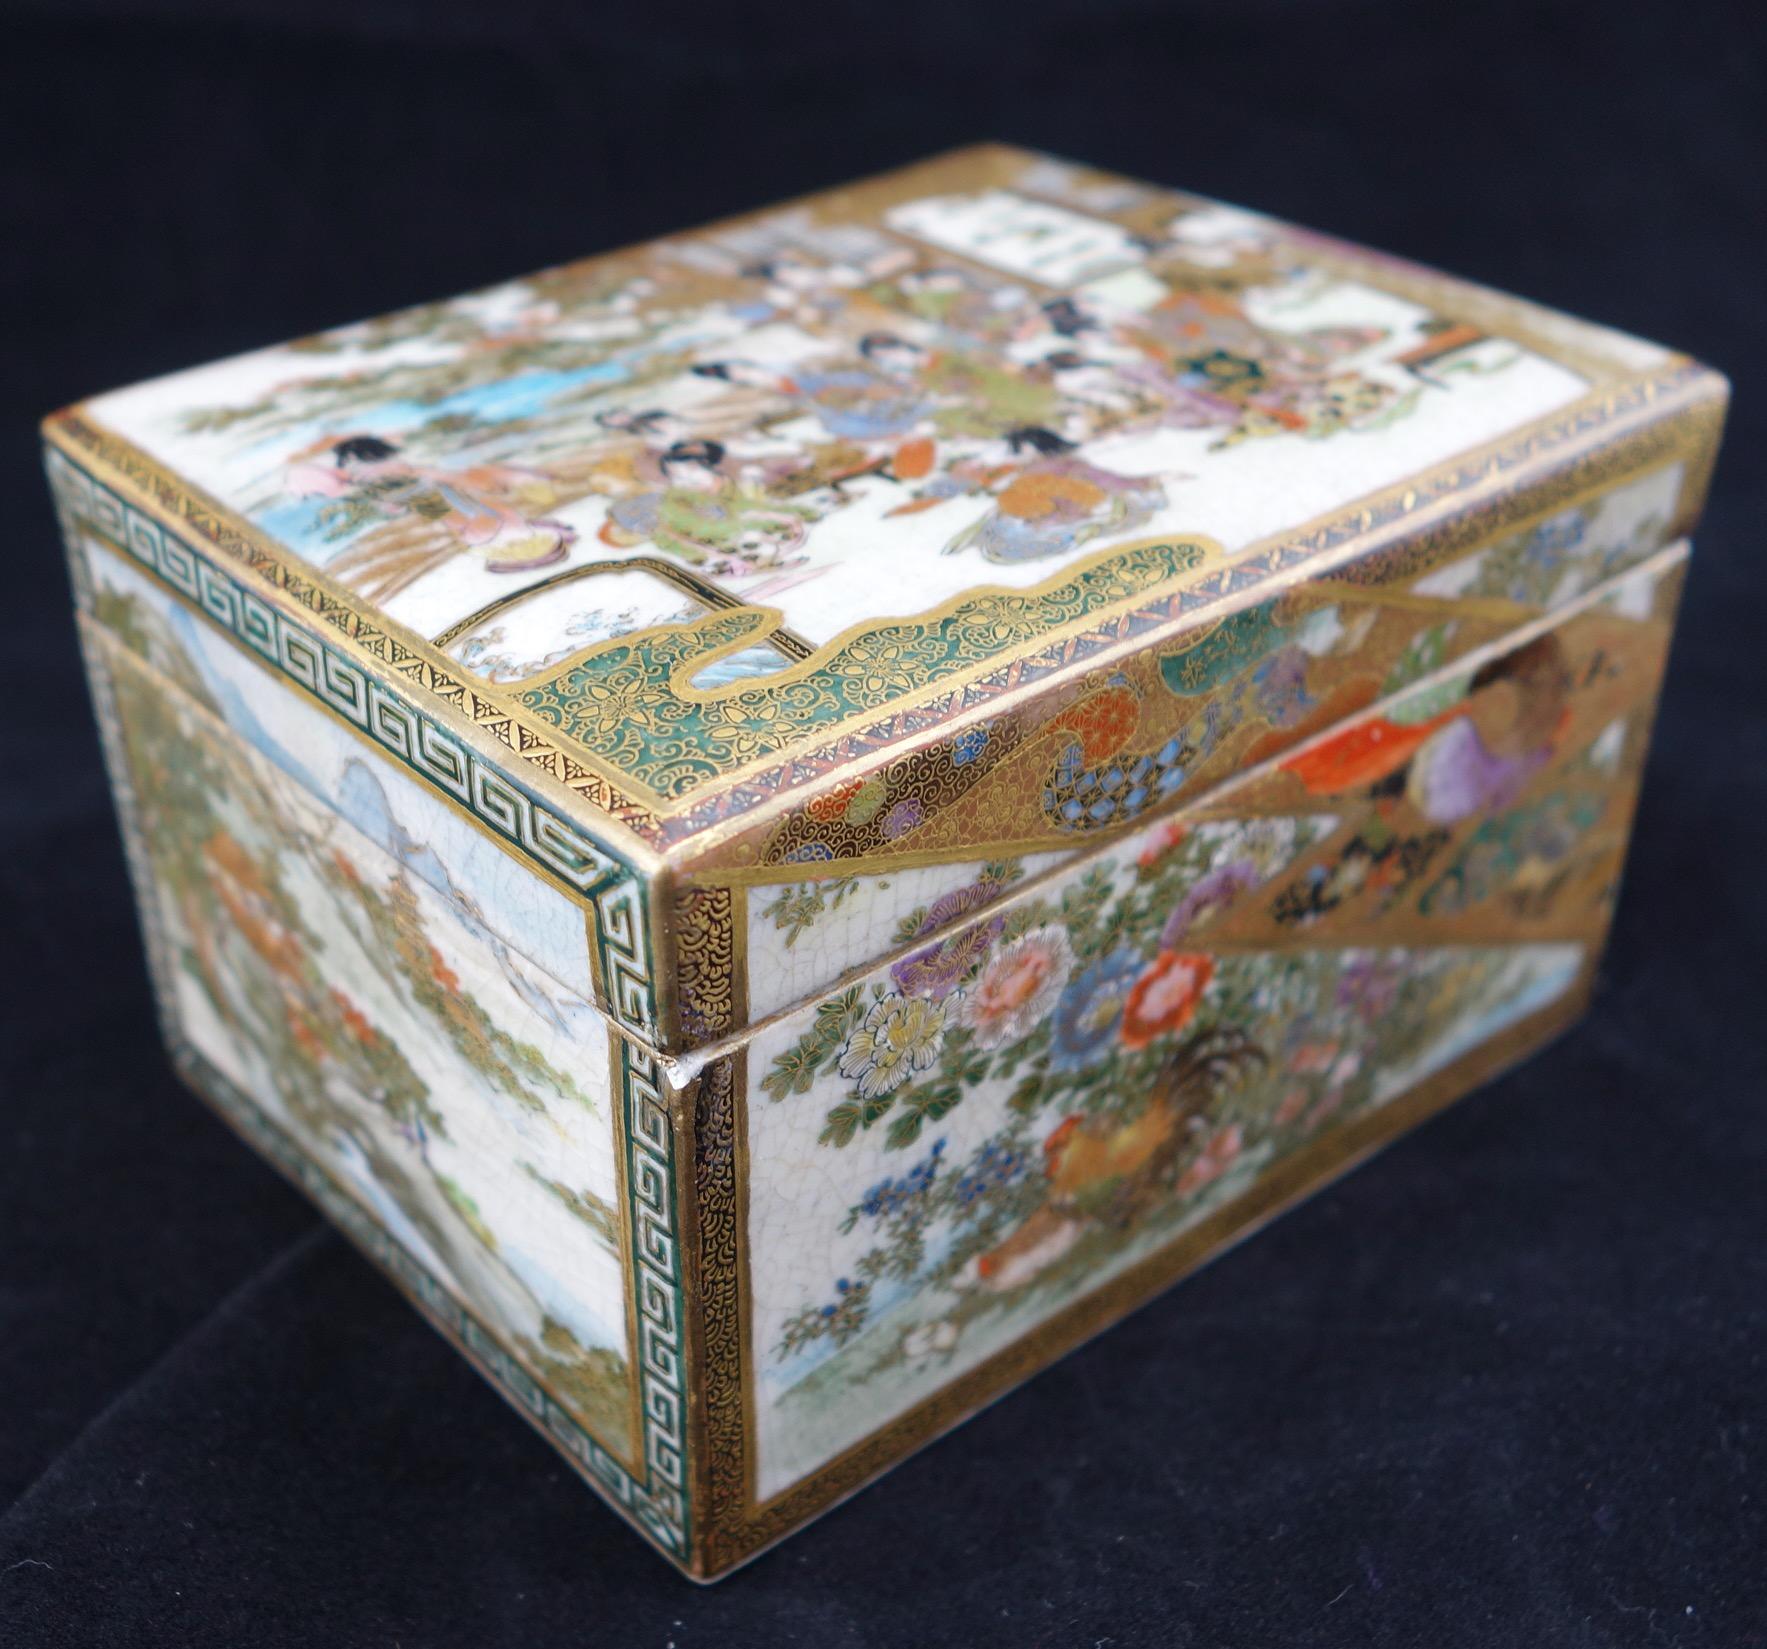 Japanese Meiji satsuma finely hand decorated and gilded box. The box depicts a different scene on each side. Marked with a maker's mark on the bottom.